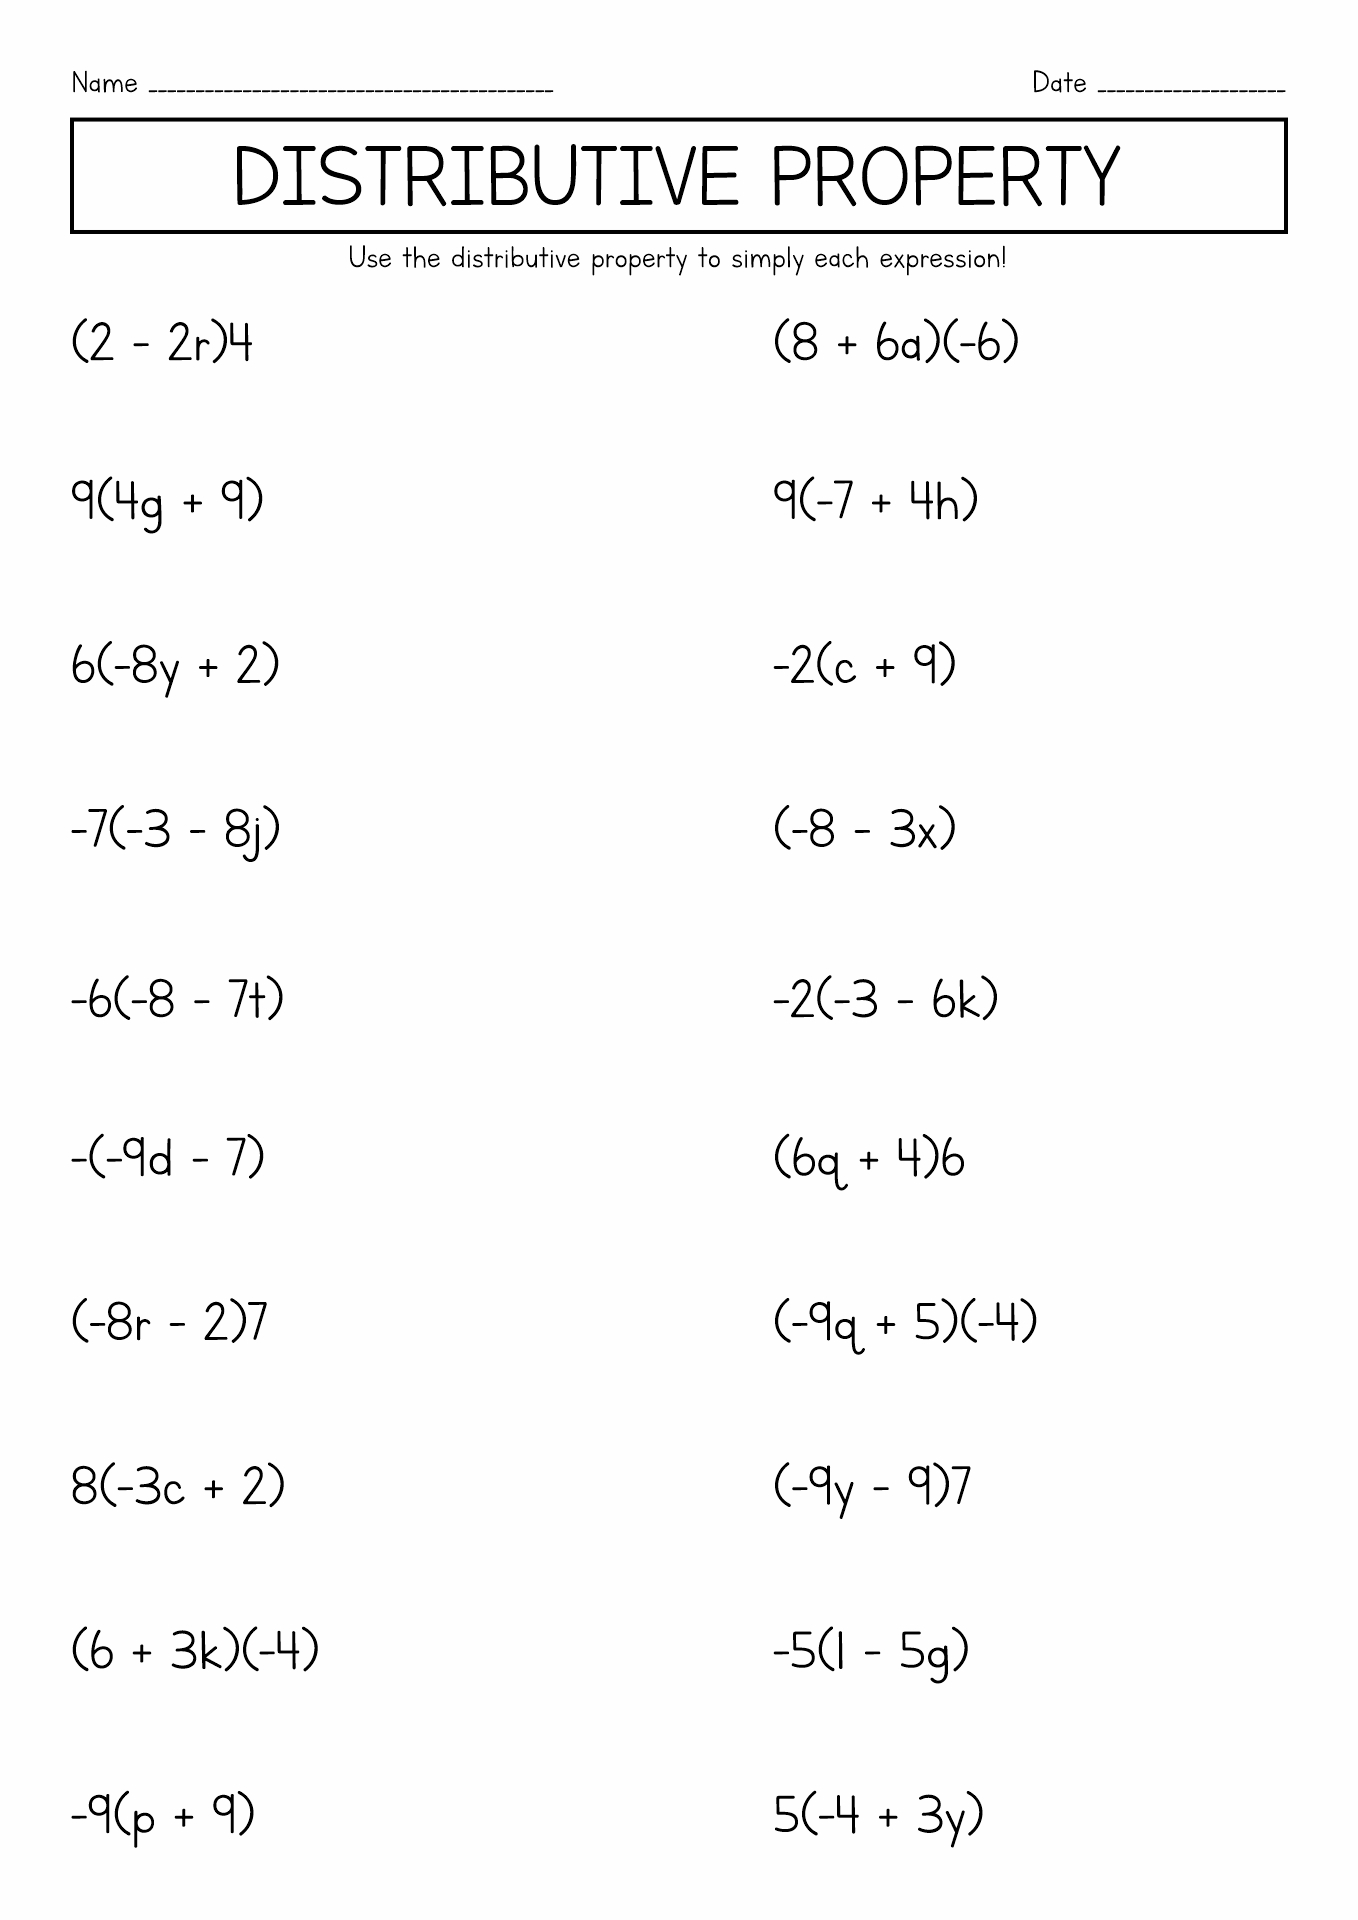 7th Grade Math Problems Worksheets Image